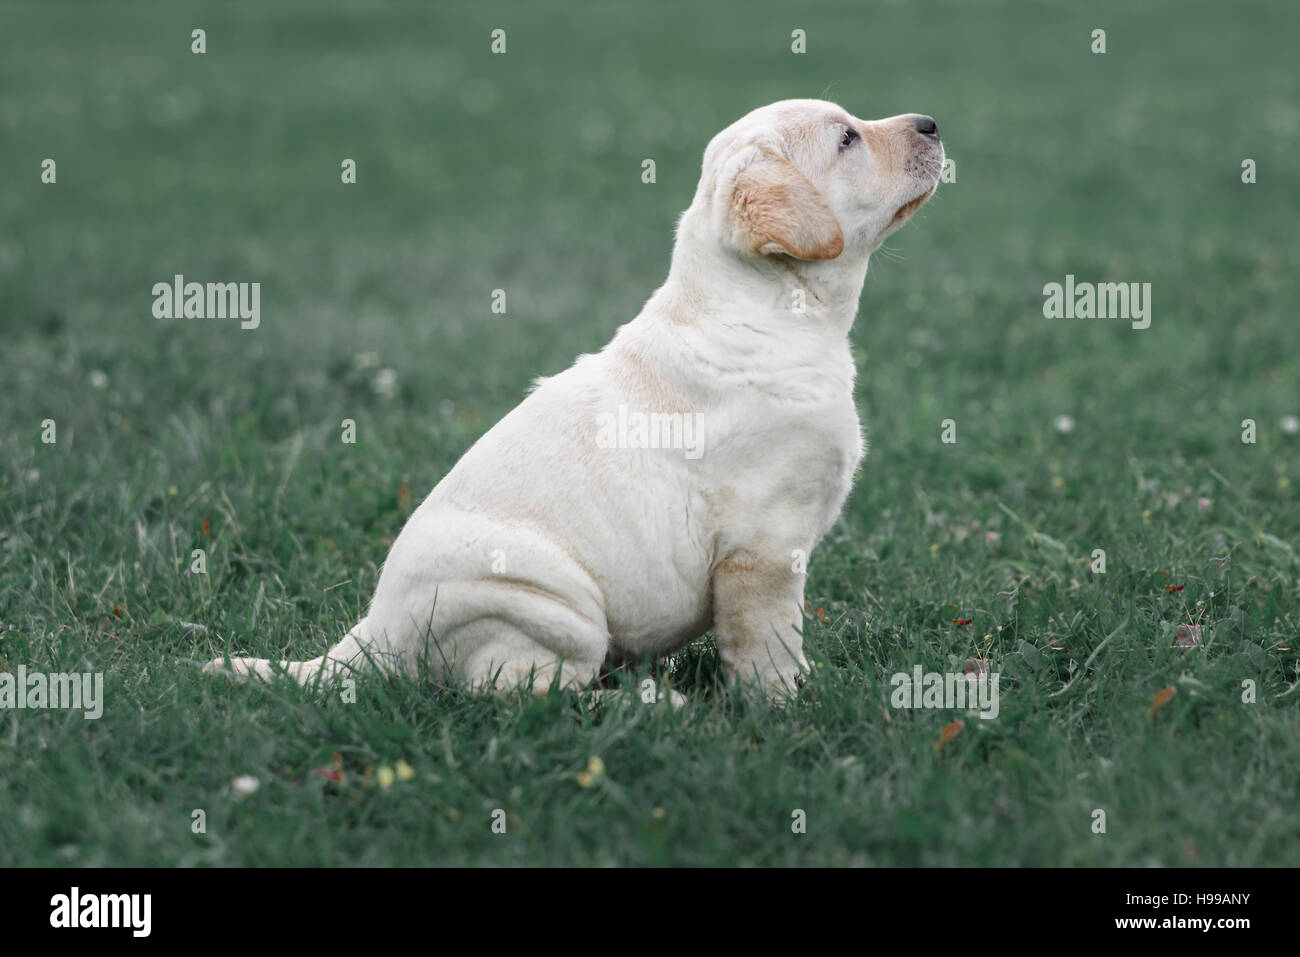 cute yellow puppy Labrador Retriever isolated on a background of green grass Stock Photo